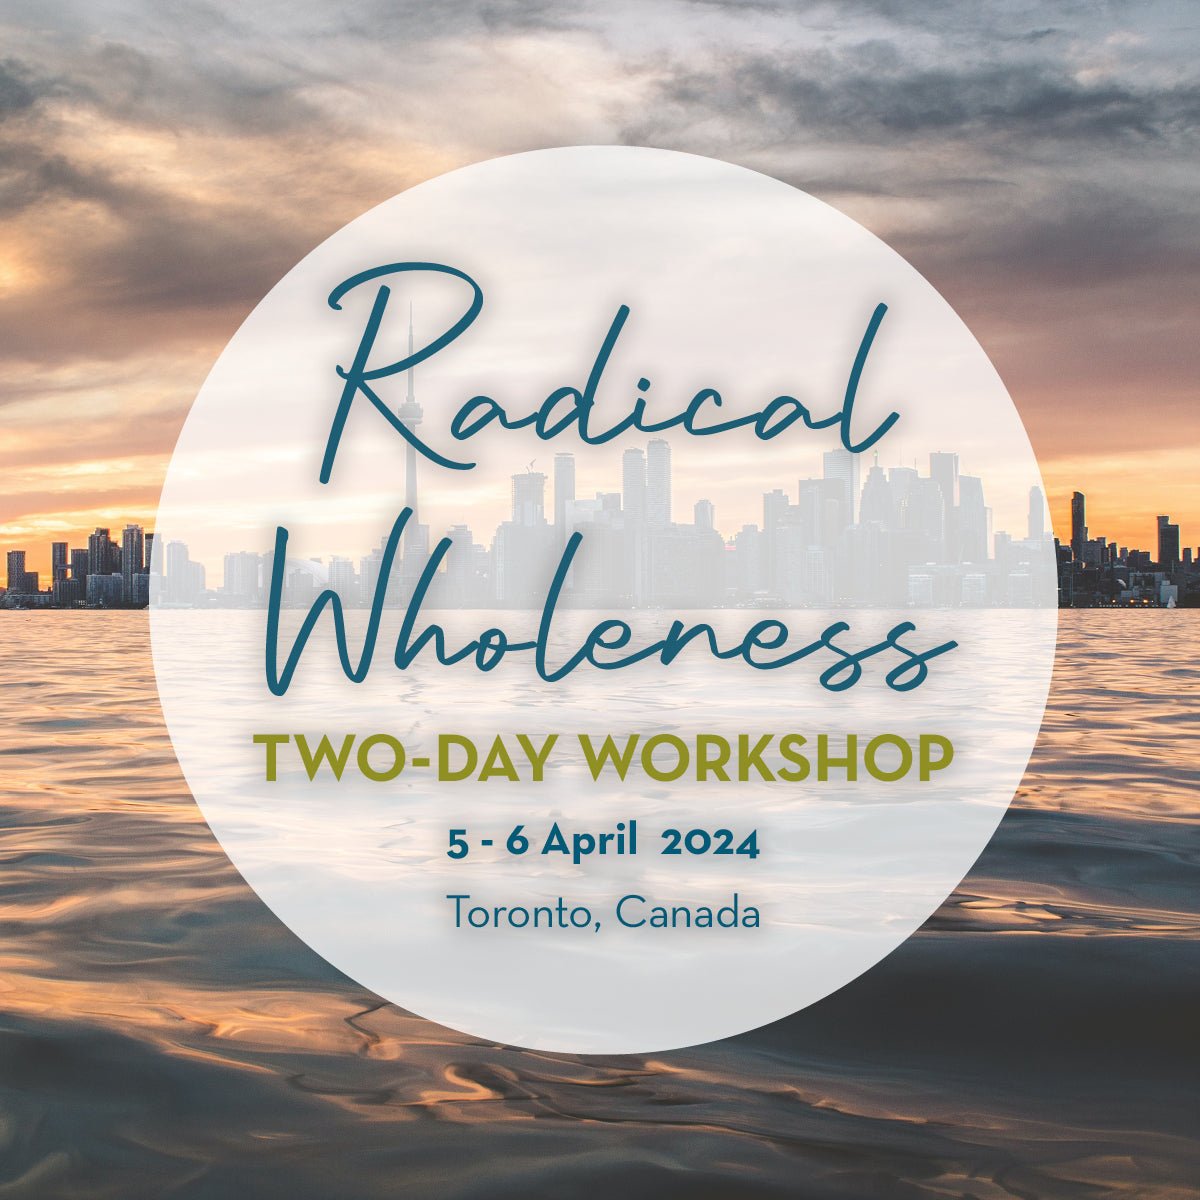 Radical Wholeness 2-day Workshop: Toronto, Canada (April 2024) - The Embodied Present Process